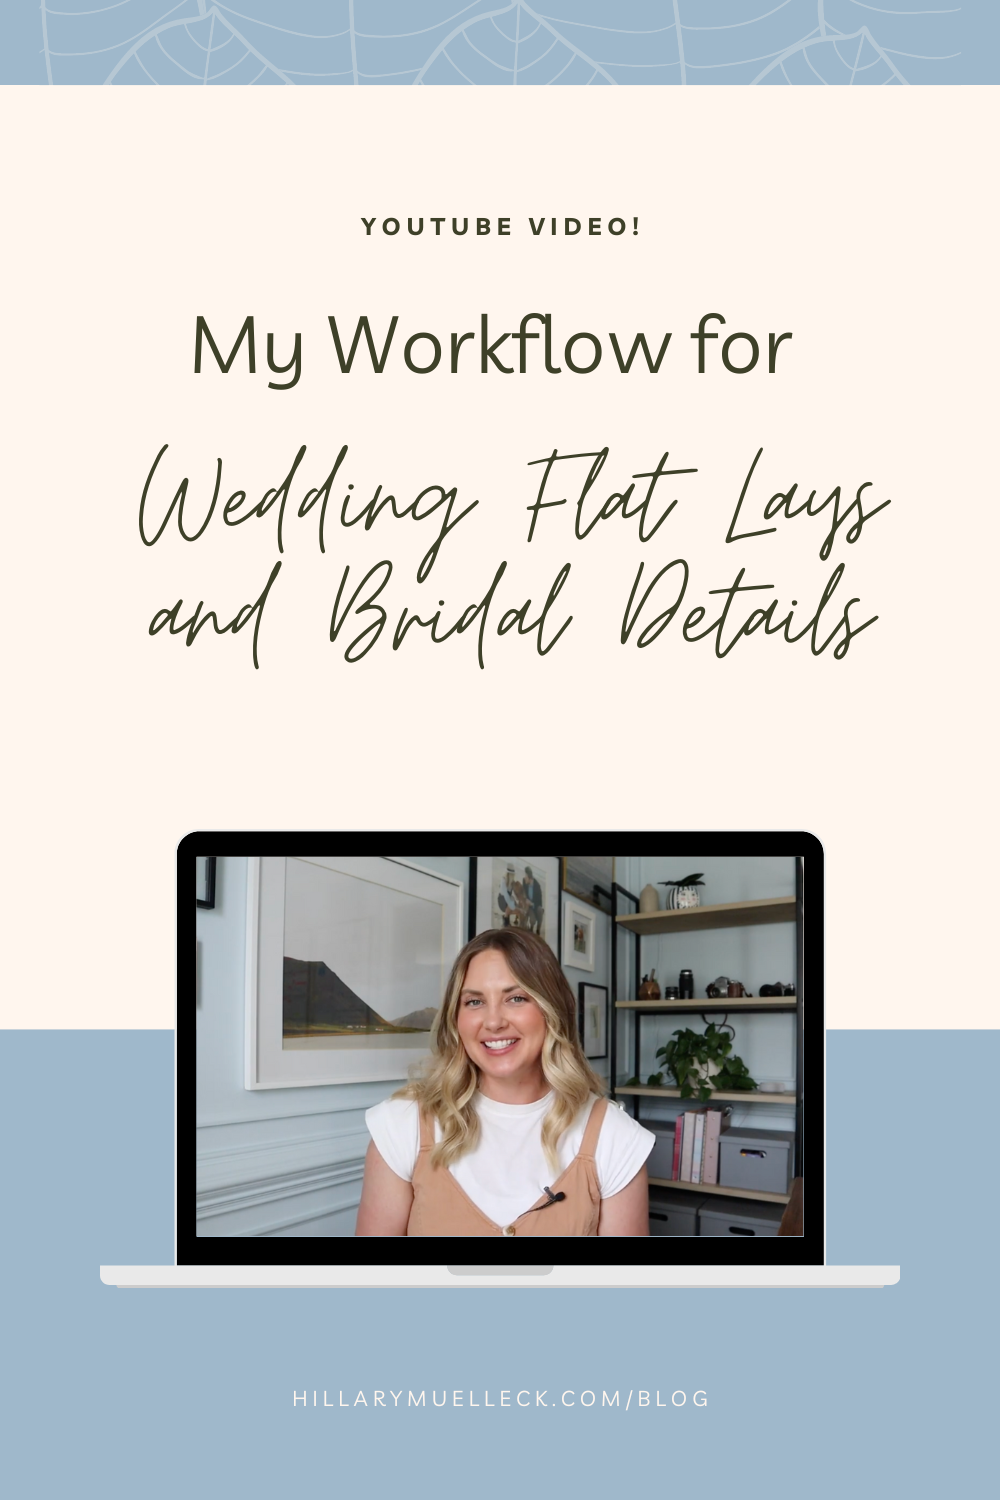 NC and SC wedding photographer Hillary Muelleck shares her workflow for photographing wedding flat lays and bridal details